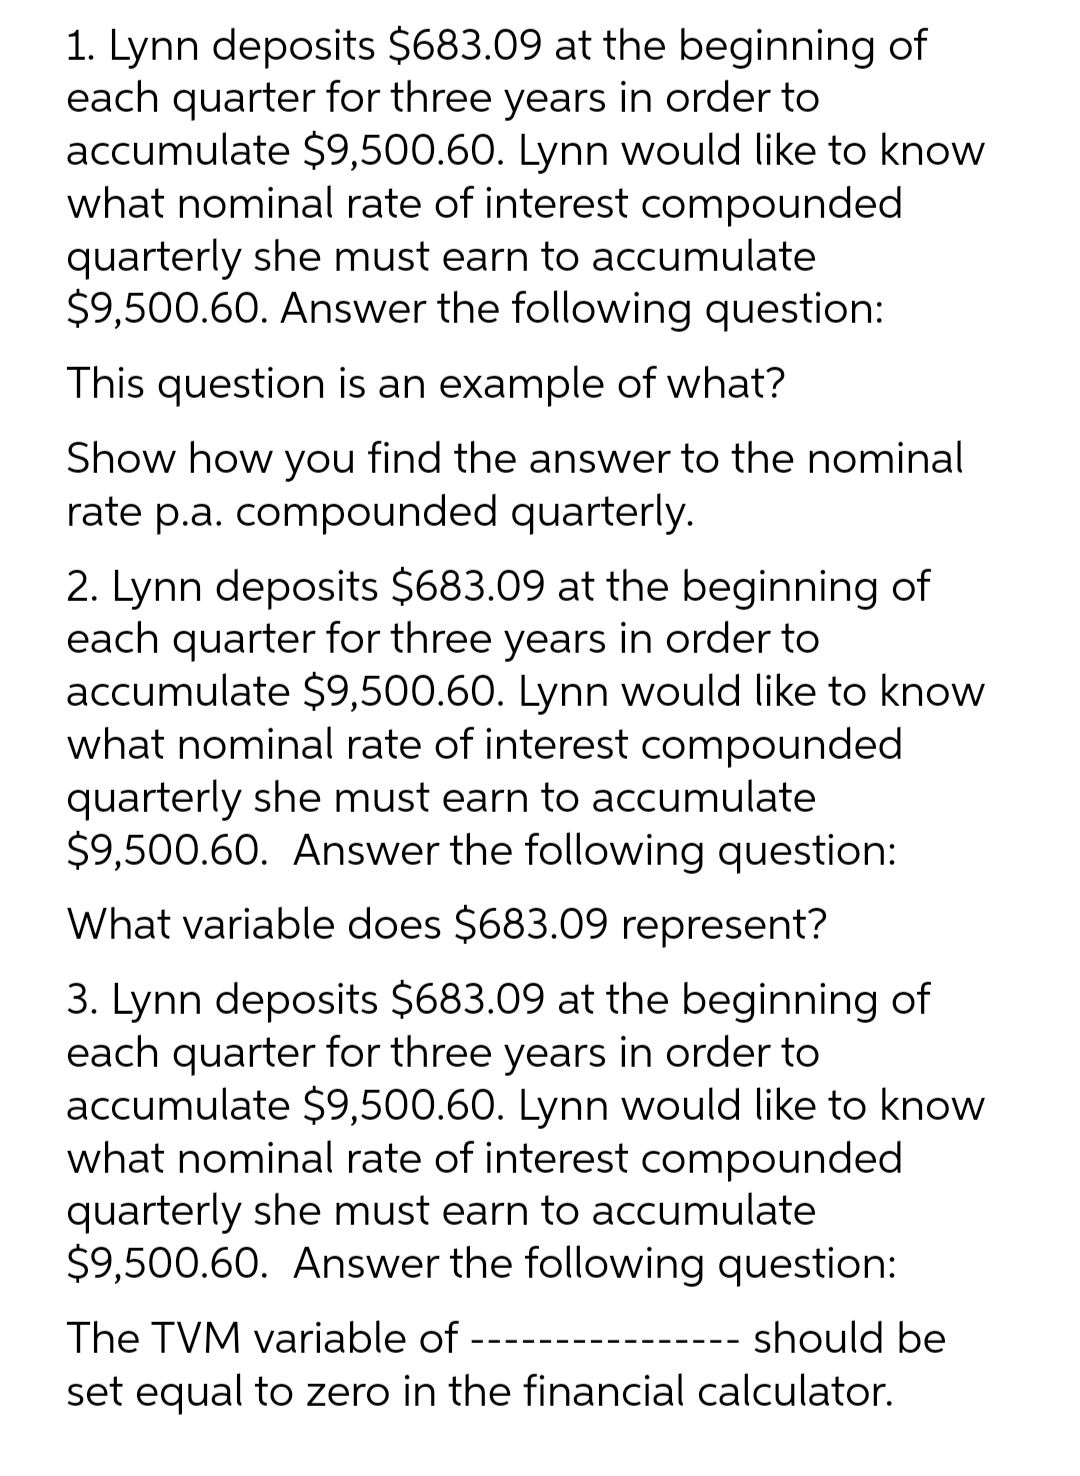 1. Lynn deposits $683.09 at the beginning of
each quarter for three years in order to
accumulate $9,500.60. Lynn would like to know
what nominal rate of interest compounded
quarterly she must earn to accumulate
$9,500.60. Answer the following question:
This question is an example of what?
Show how you find the answer to the nominal
rate p.a. compounded quarterly.
2. Lynn deposits $683.09 at the beginning of
each quarter for three years in order to
accumulate $9,500.60. Lynn would like to know
what nominal rate of interest compounded
quarterly she must earn to accumulate
$9,500.60. Answer the following question:
What variable does $683.09 represent?
3. Lynn deposits $683.09 at the beginning of
each quarter for three years in order to
accumulate $9,500.60. Lynn would like to know
what nominal rate of interest compounded
quarterly she must earn to accumulate
$9,500.60. Answer the following question:
The TVM variable of
should be
set equal to zero in the financial calculator.